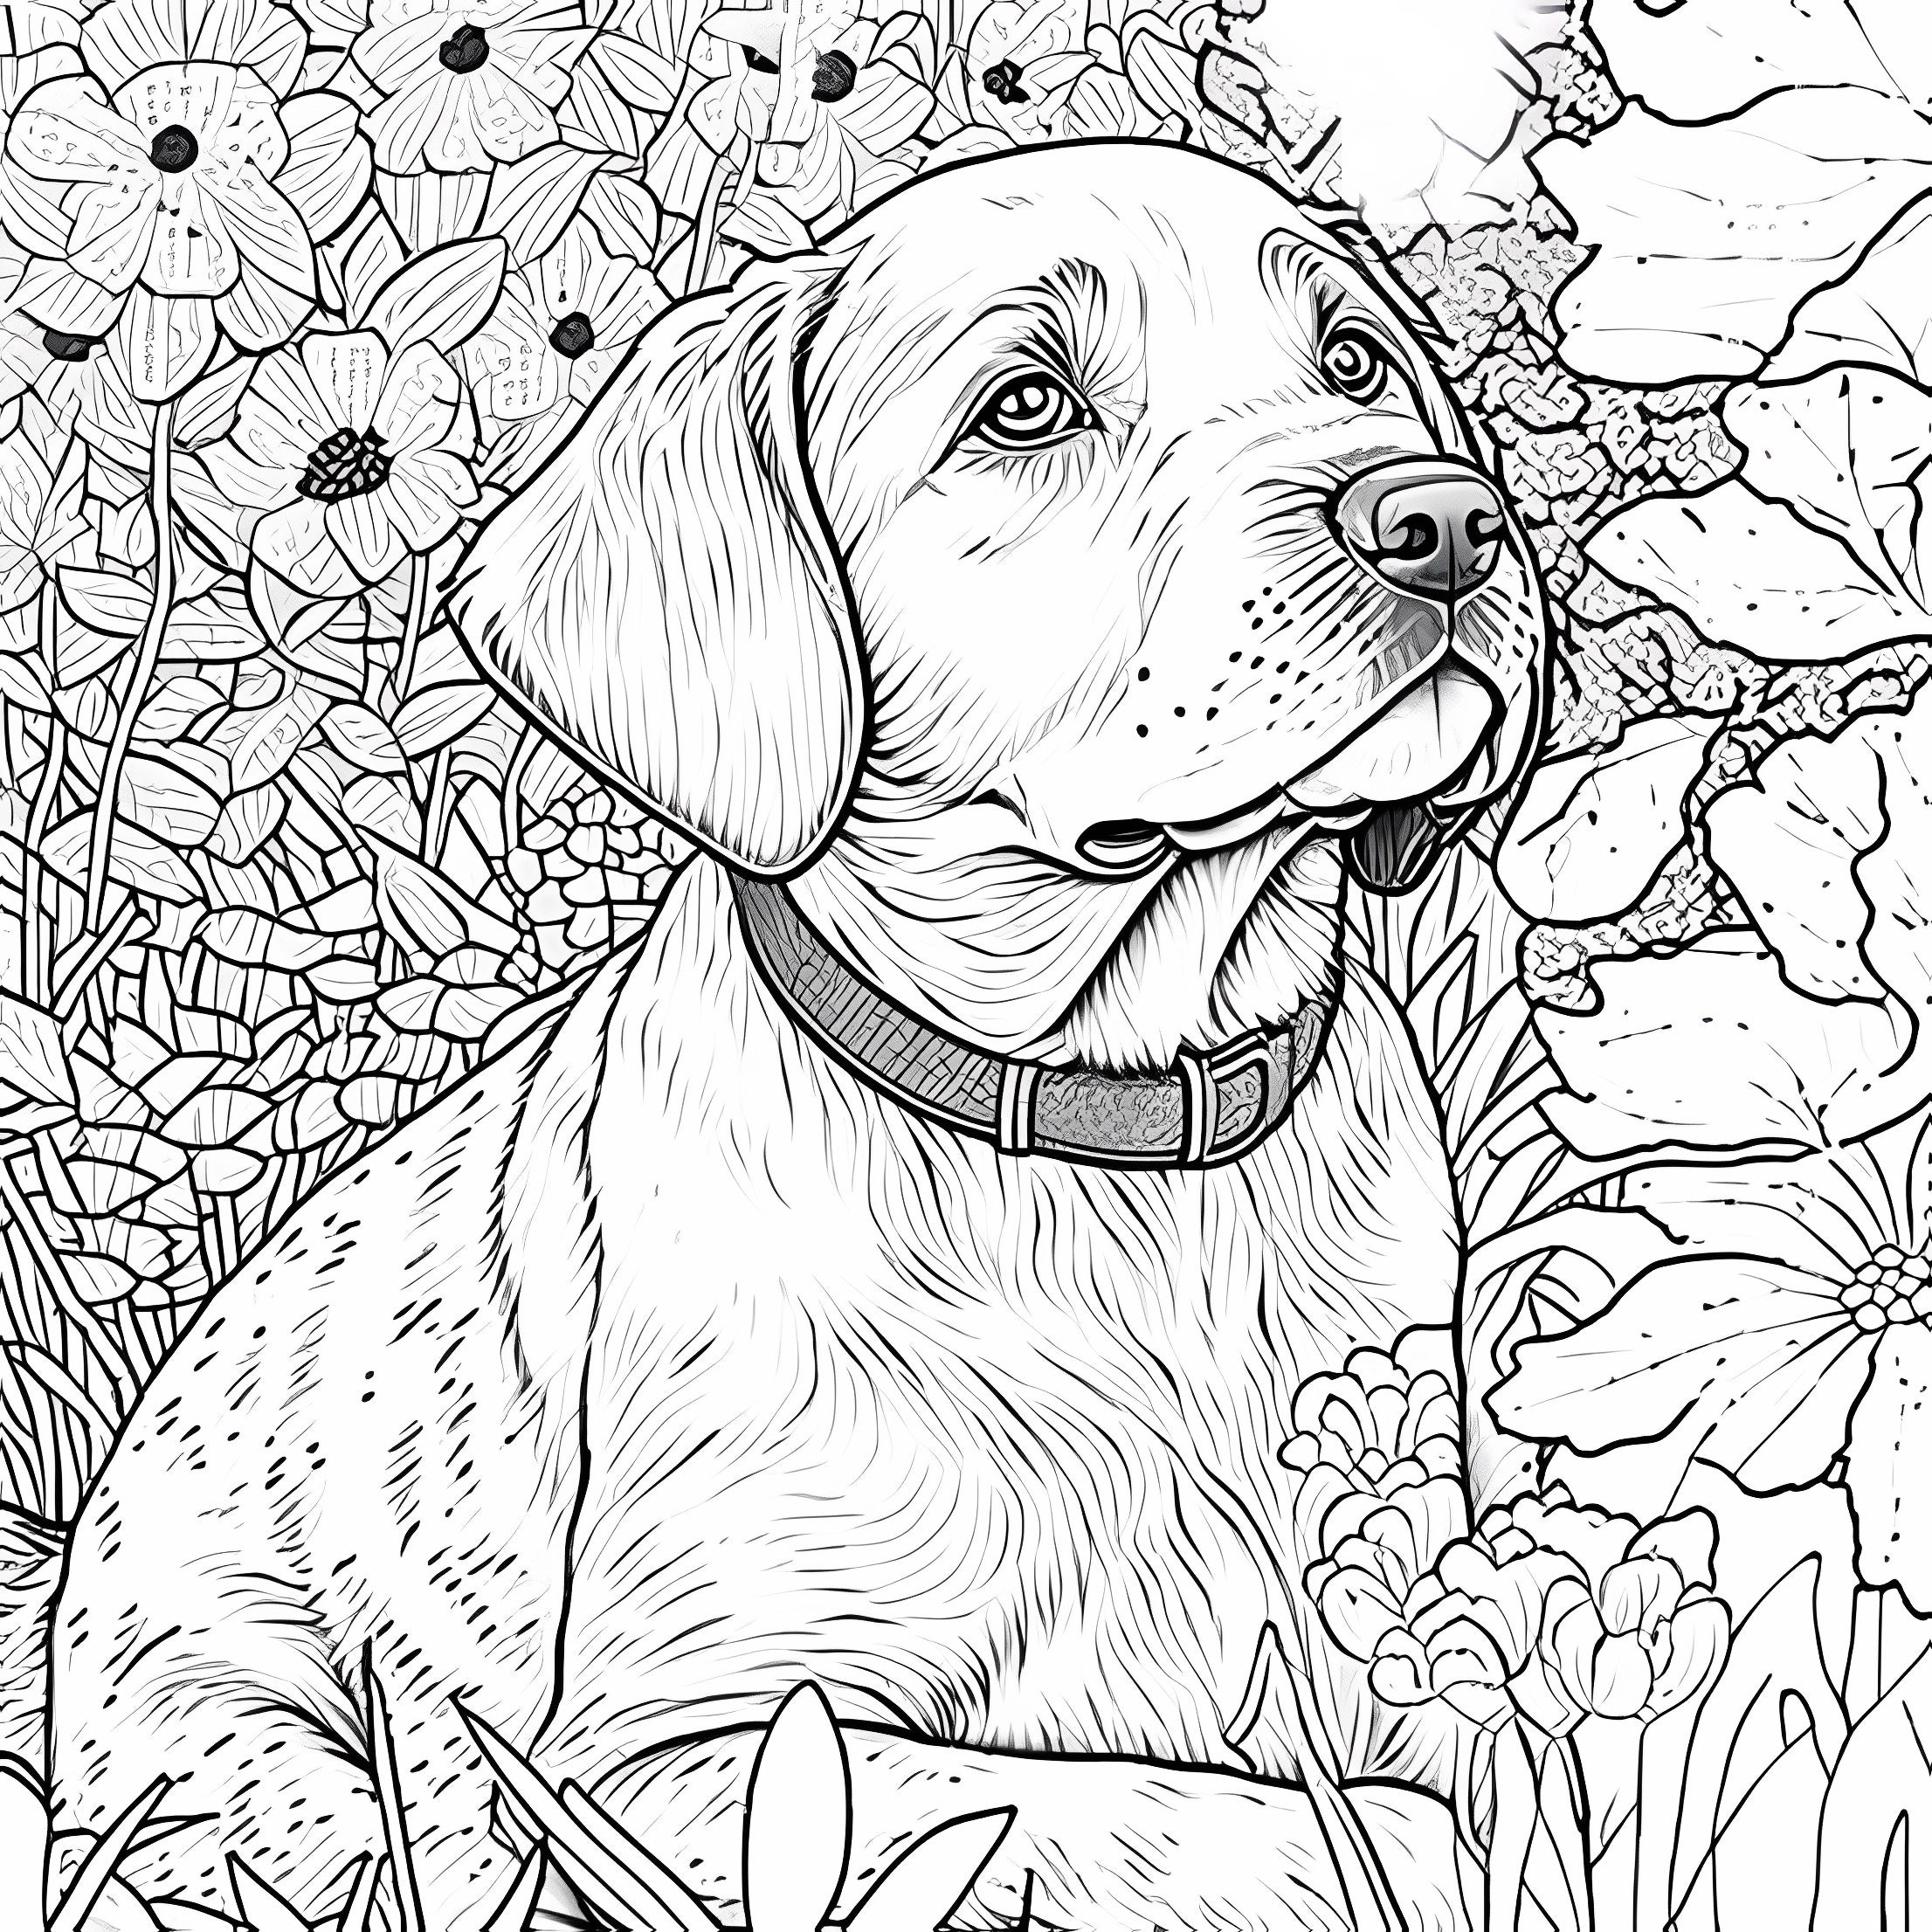 Relaxation Dog Coloring Book For Kids Ages 8-12 and Adults: (For Dog Lovers  Seeking Stress Relief and Less Anxiety - 50 Unique Dog Pictures For Kids